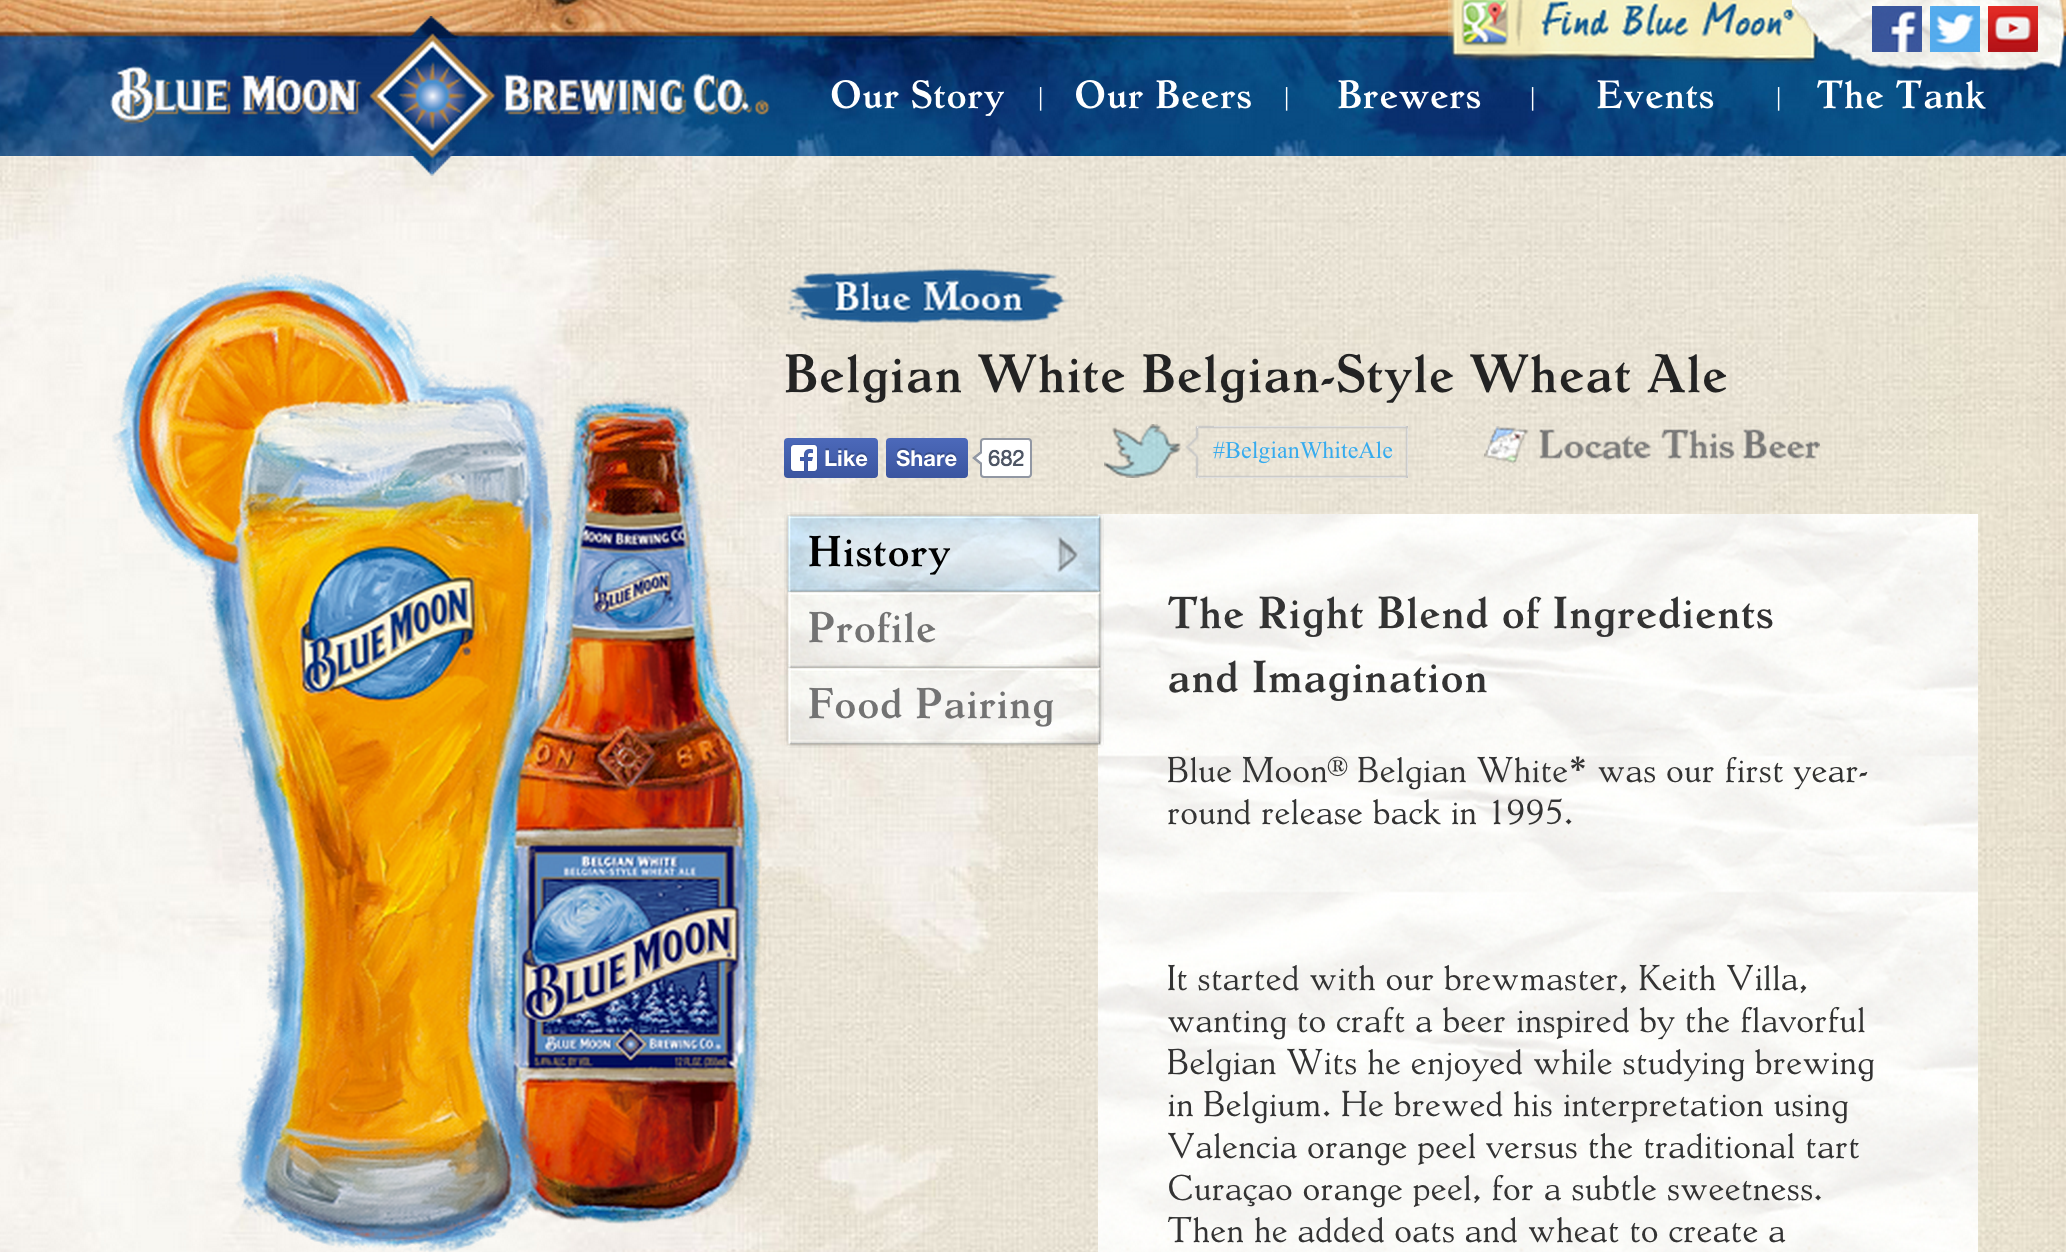 millercoors-gets-court-to-throw-out-blue-moon-craft-beer-lawsuit